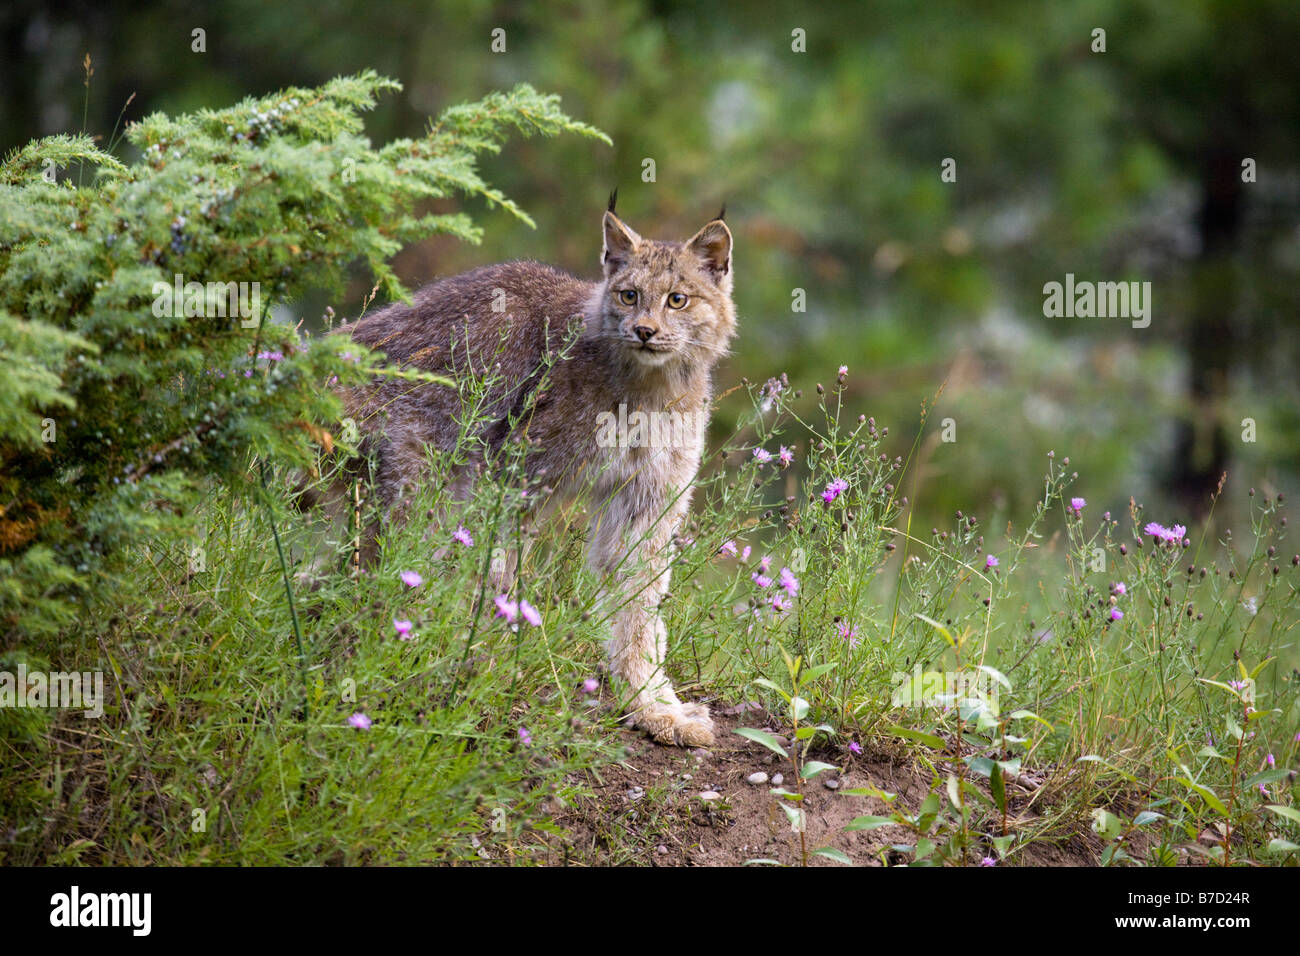 Canadian Lynx in a forest, Montana, USA Stock Photo